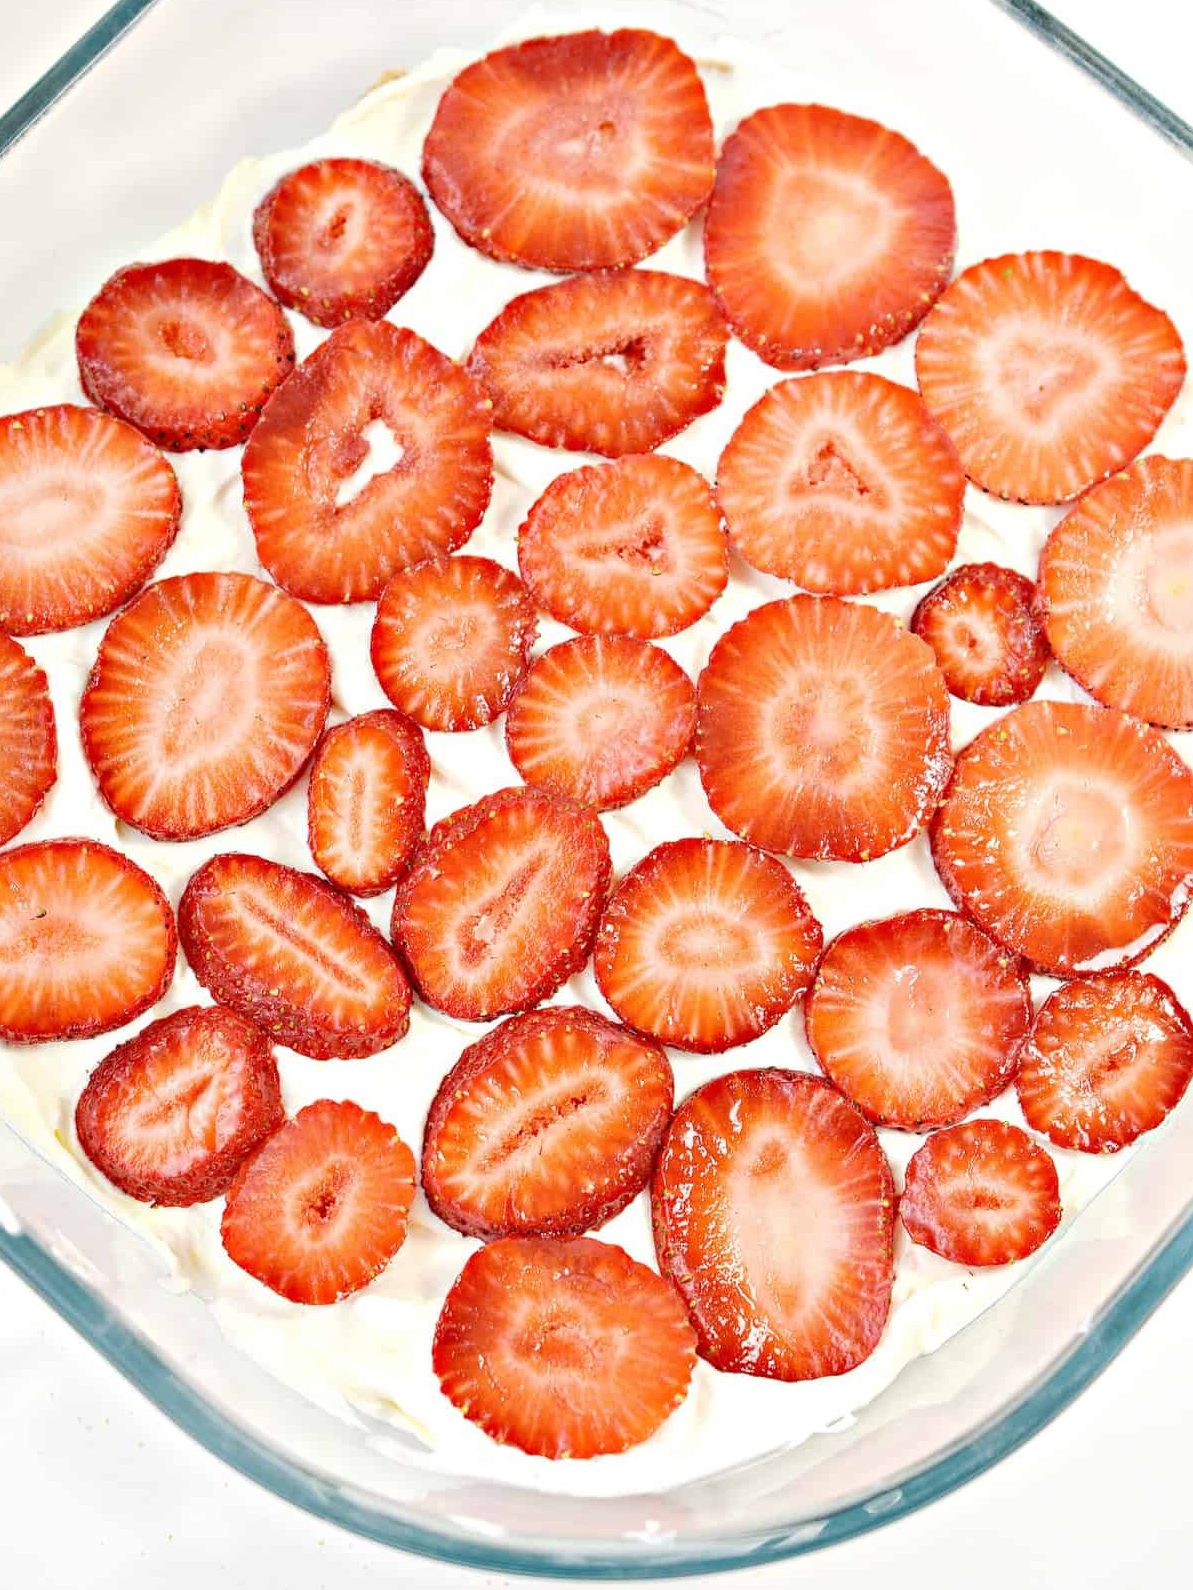 Place a layer of sliced strawberries along the top of the cream cheese mixture.